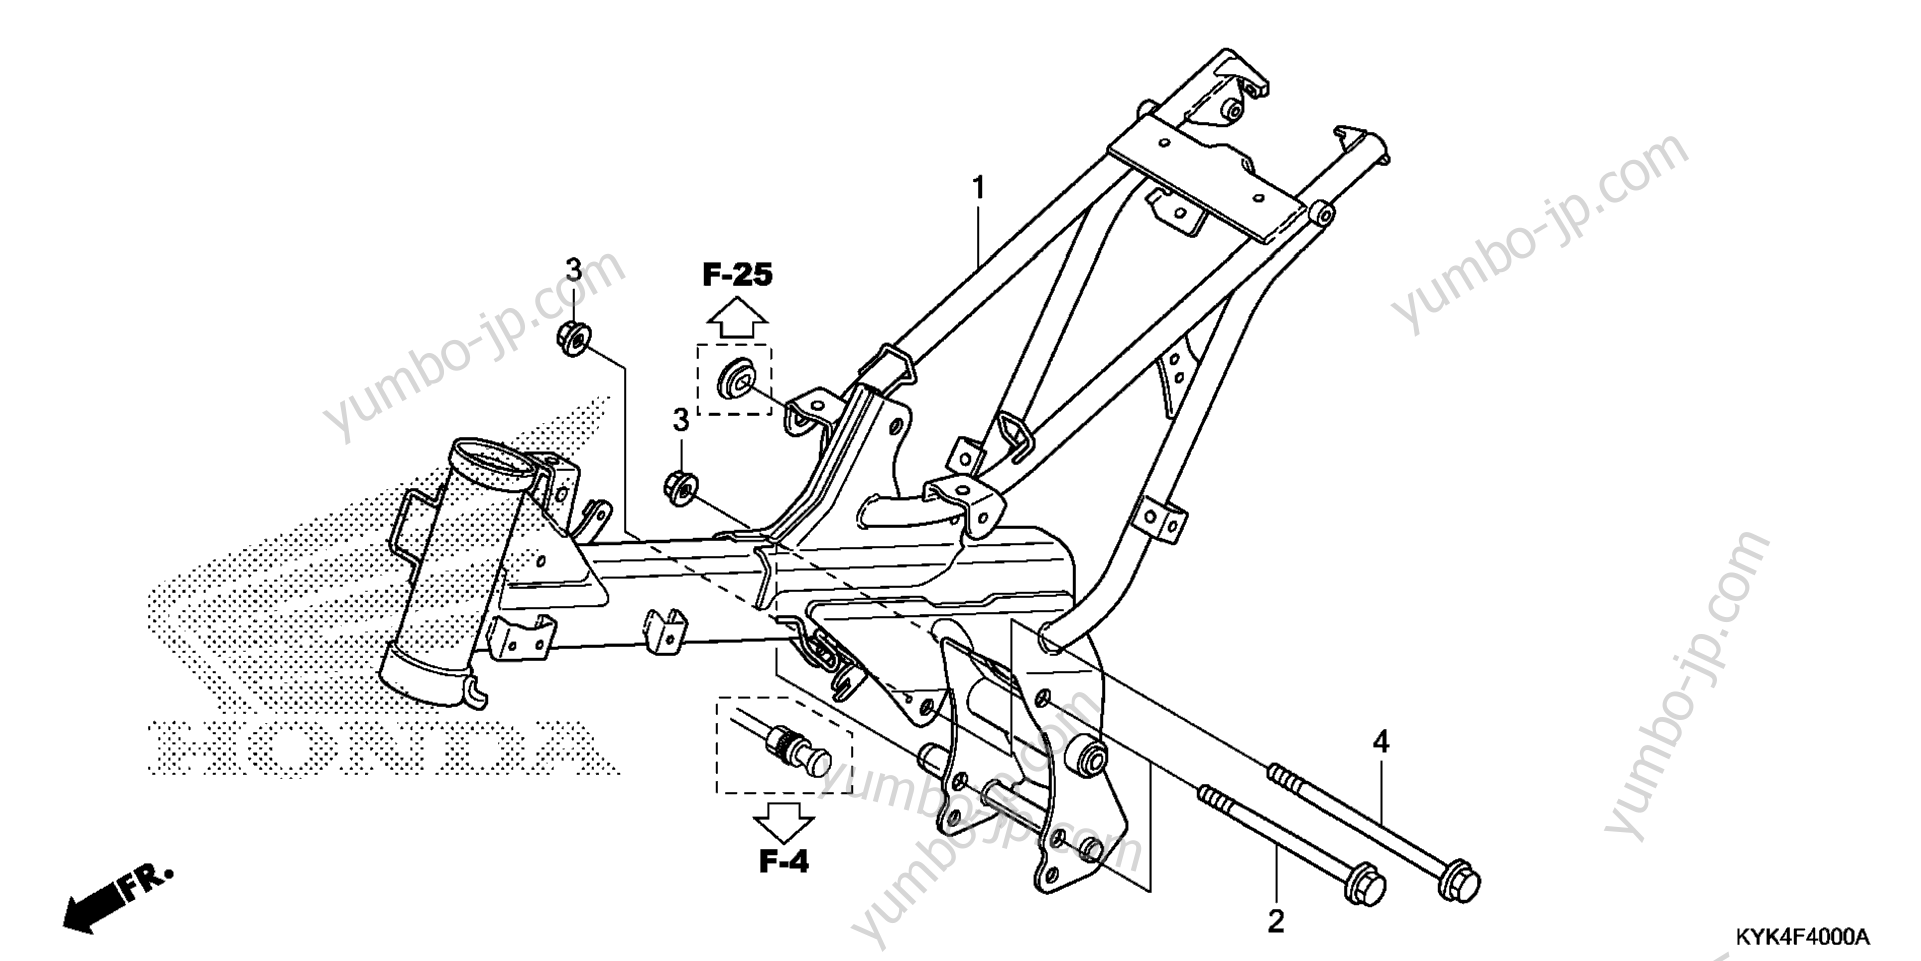 FRAME for motorcycles HONDA CRF110F AC 2015 year